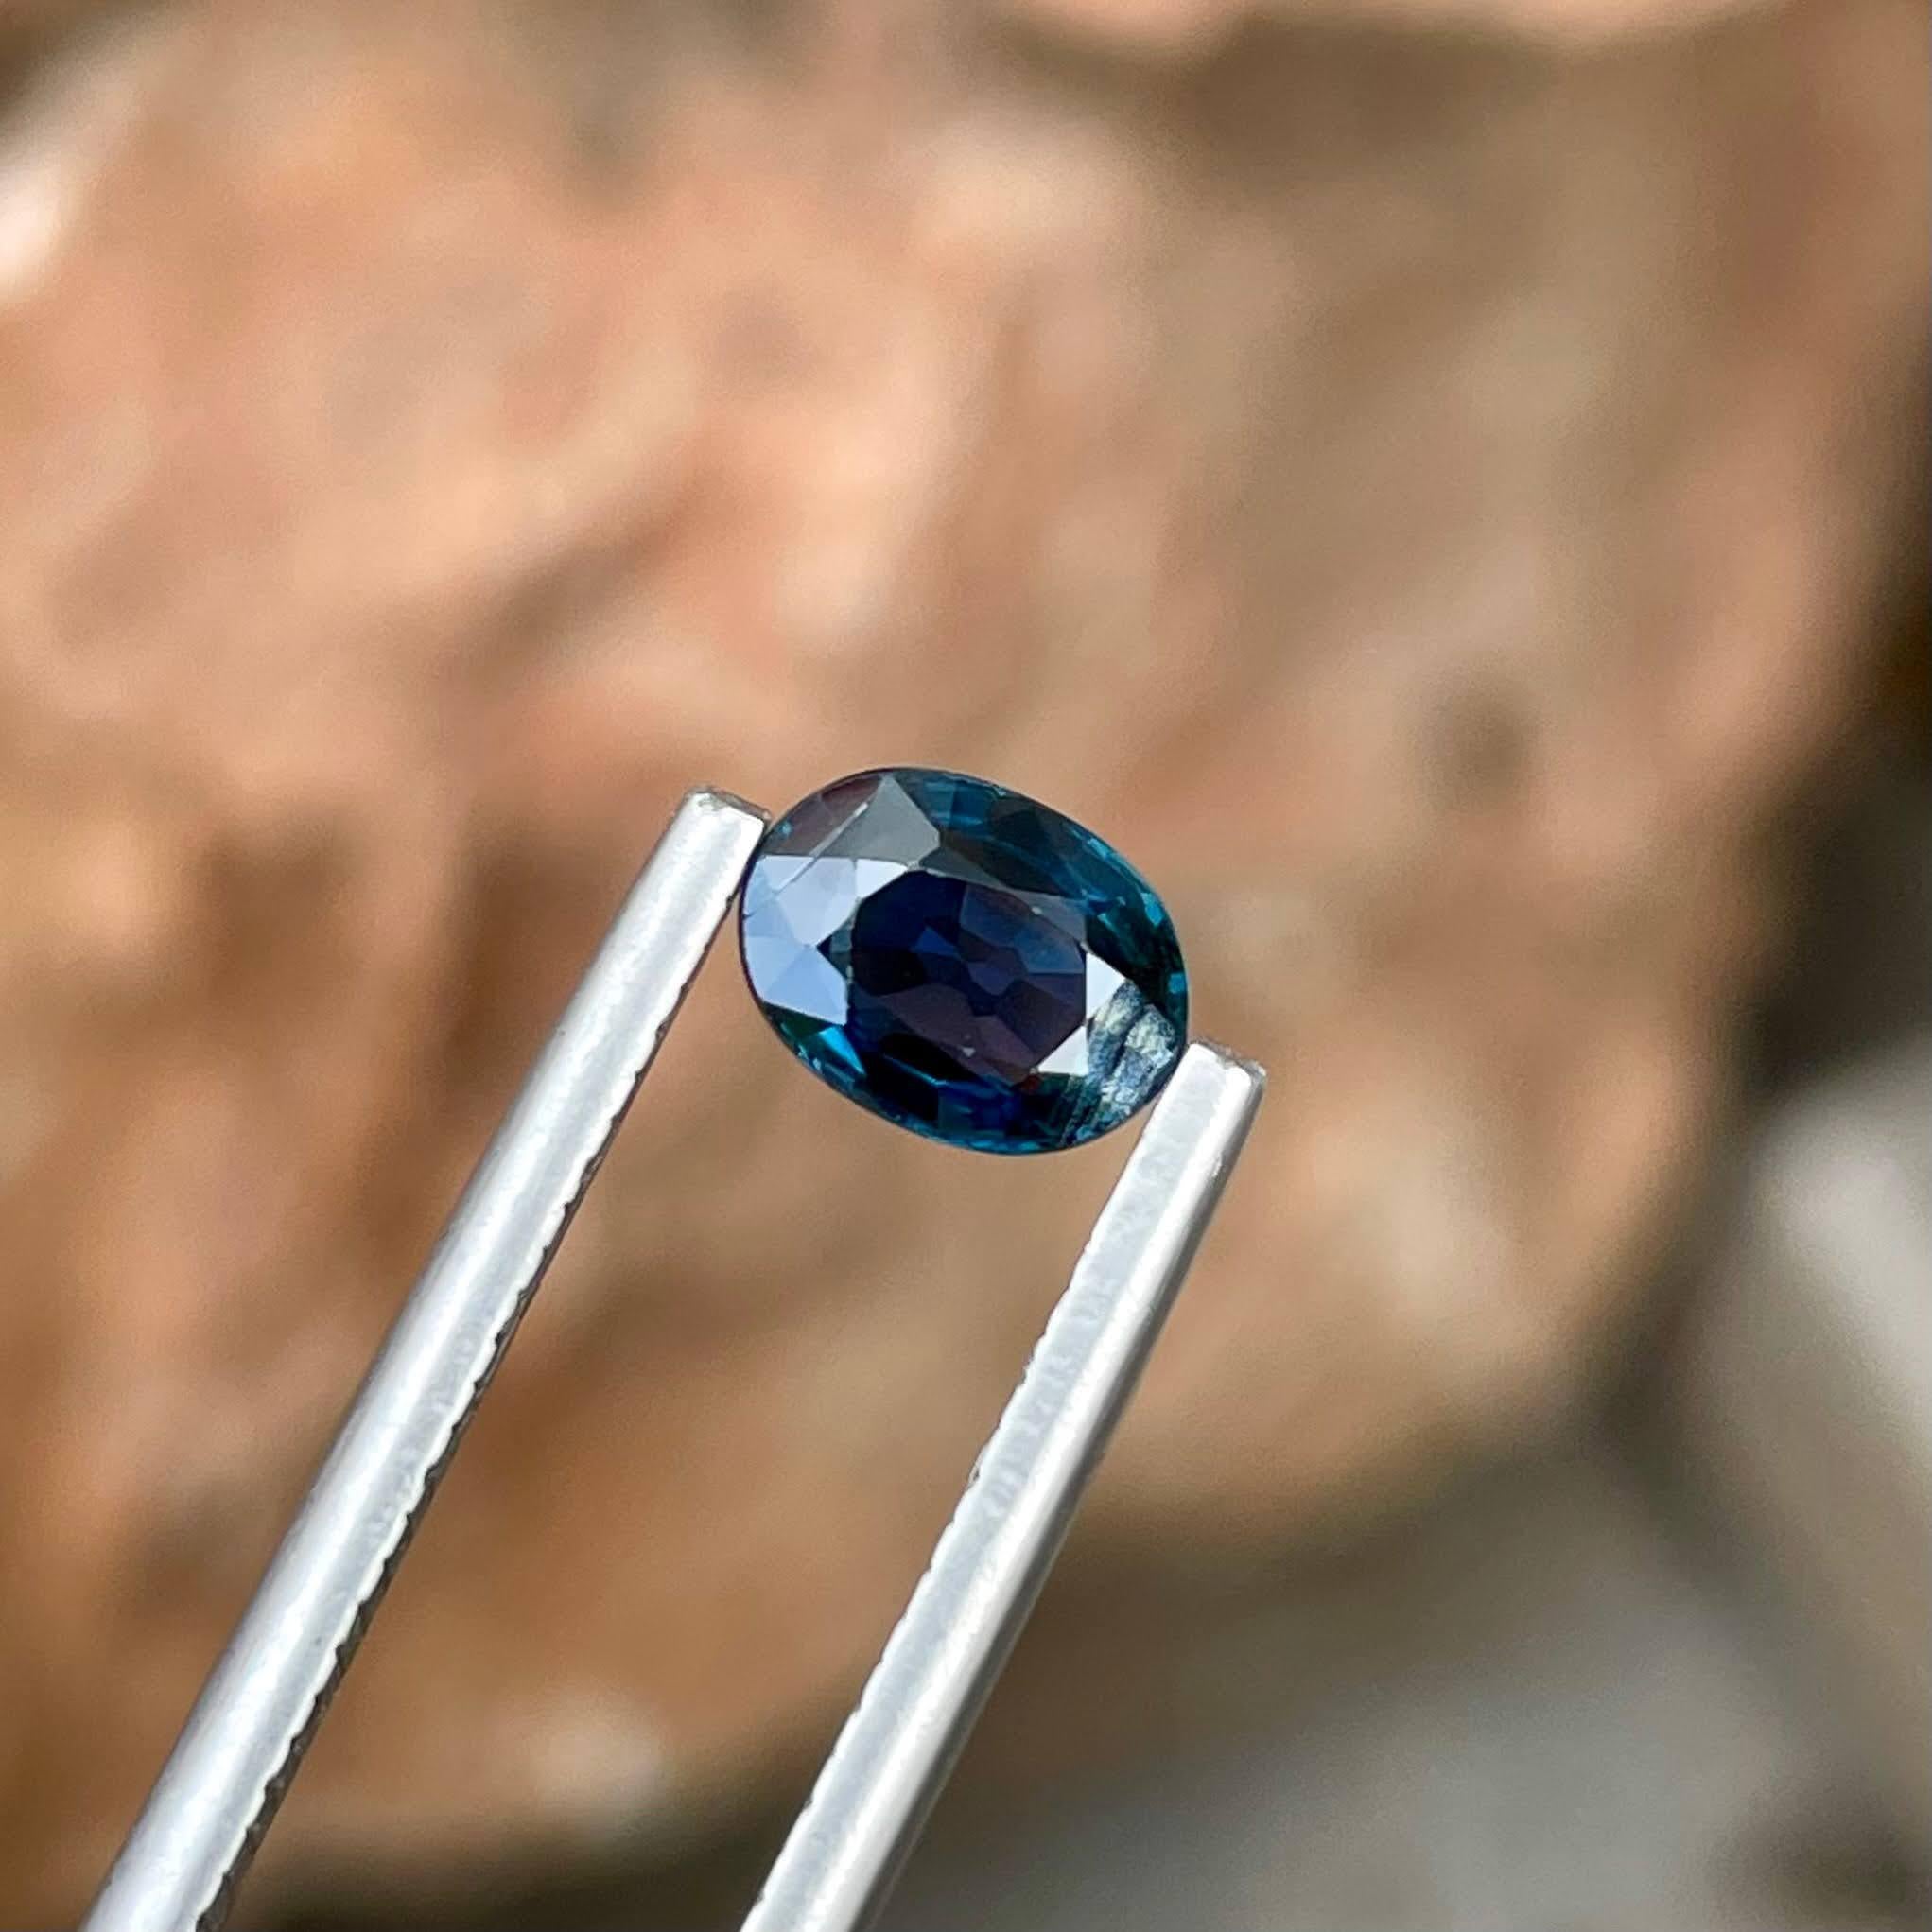 Weight 0.88 carats 
Dimensions 7.08x5.71x2.51 mm
Treatment none 
Clarity VVS
Origin Madagascar 
Shape oval 
Cut oval 




This exquisite 0.88 carat deep blue sapphire stone boasts an elegant oval cut, showcasing the brilliance of Madagascar's